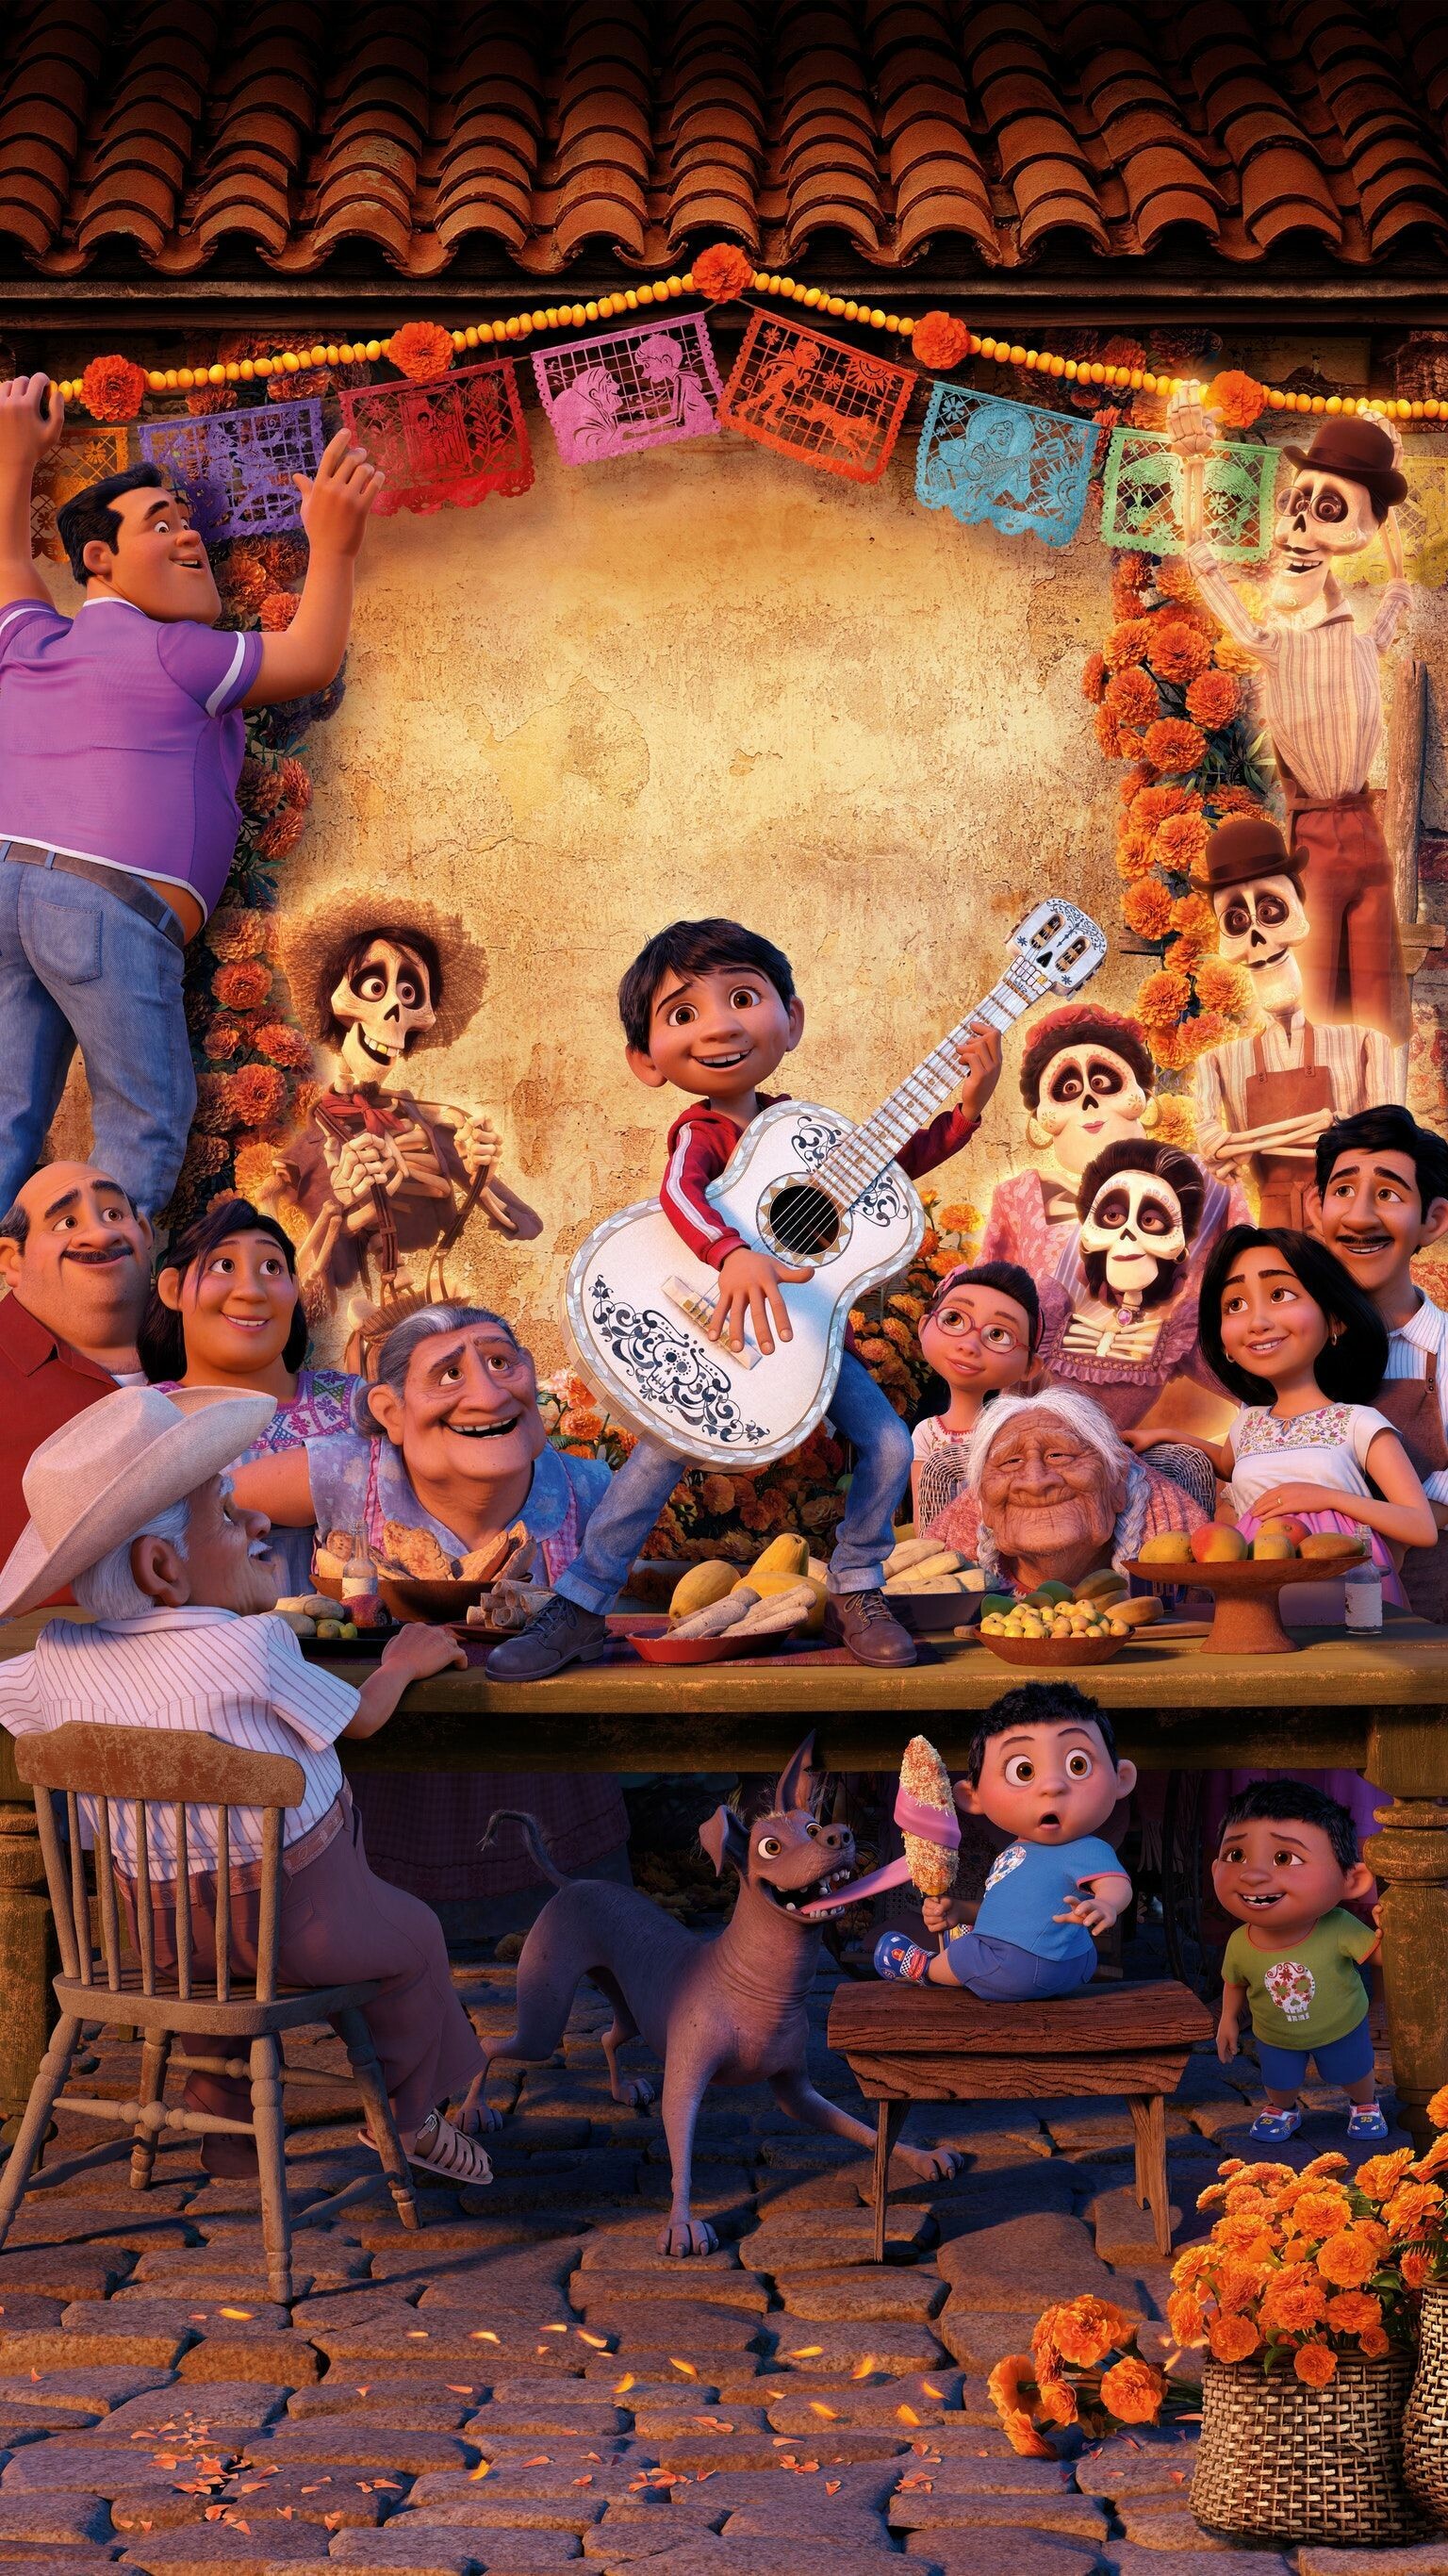 Coco (Cartoon): Received two awards at the 90th Academy Awards, and numerous other accolades. 1540x2740 HD Background.